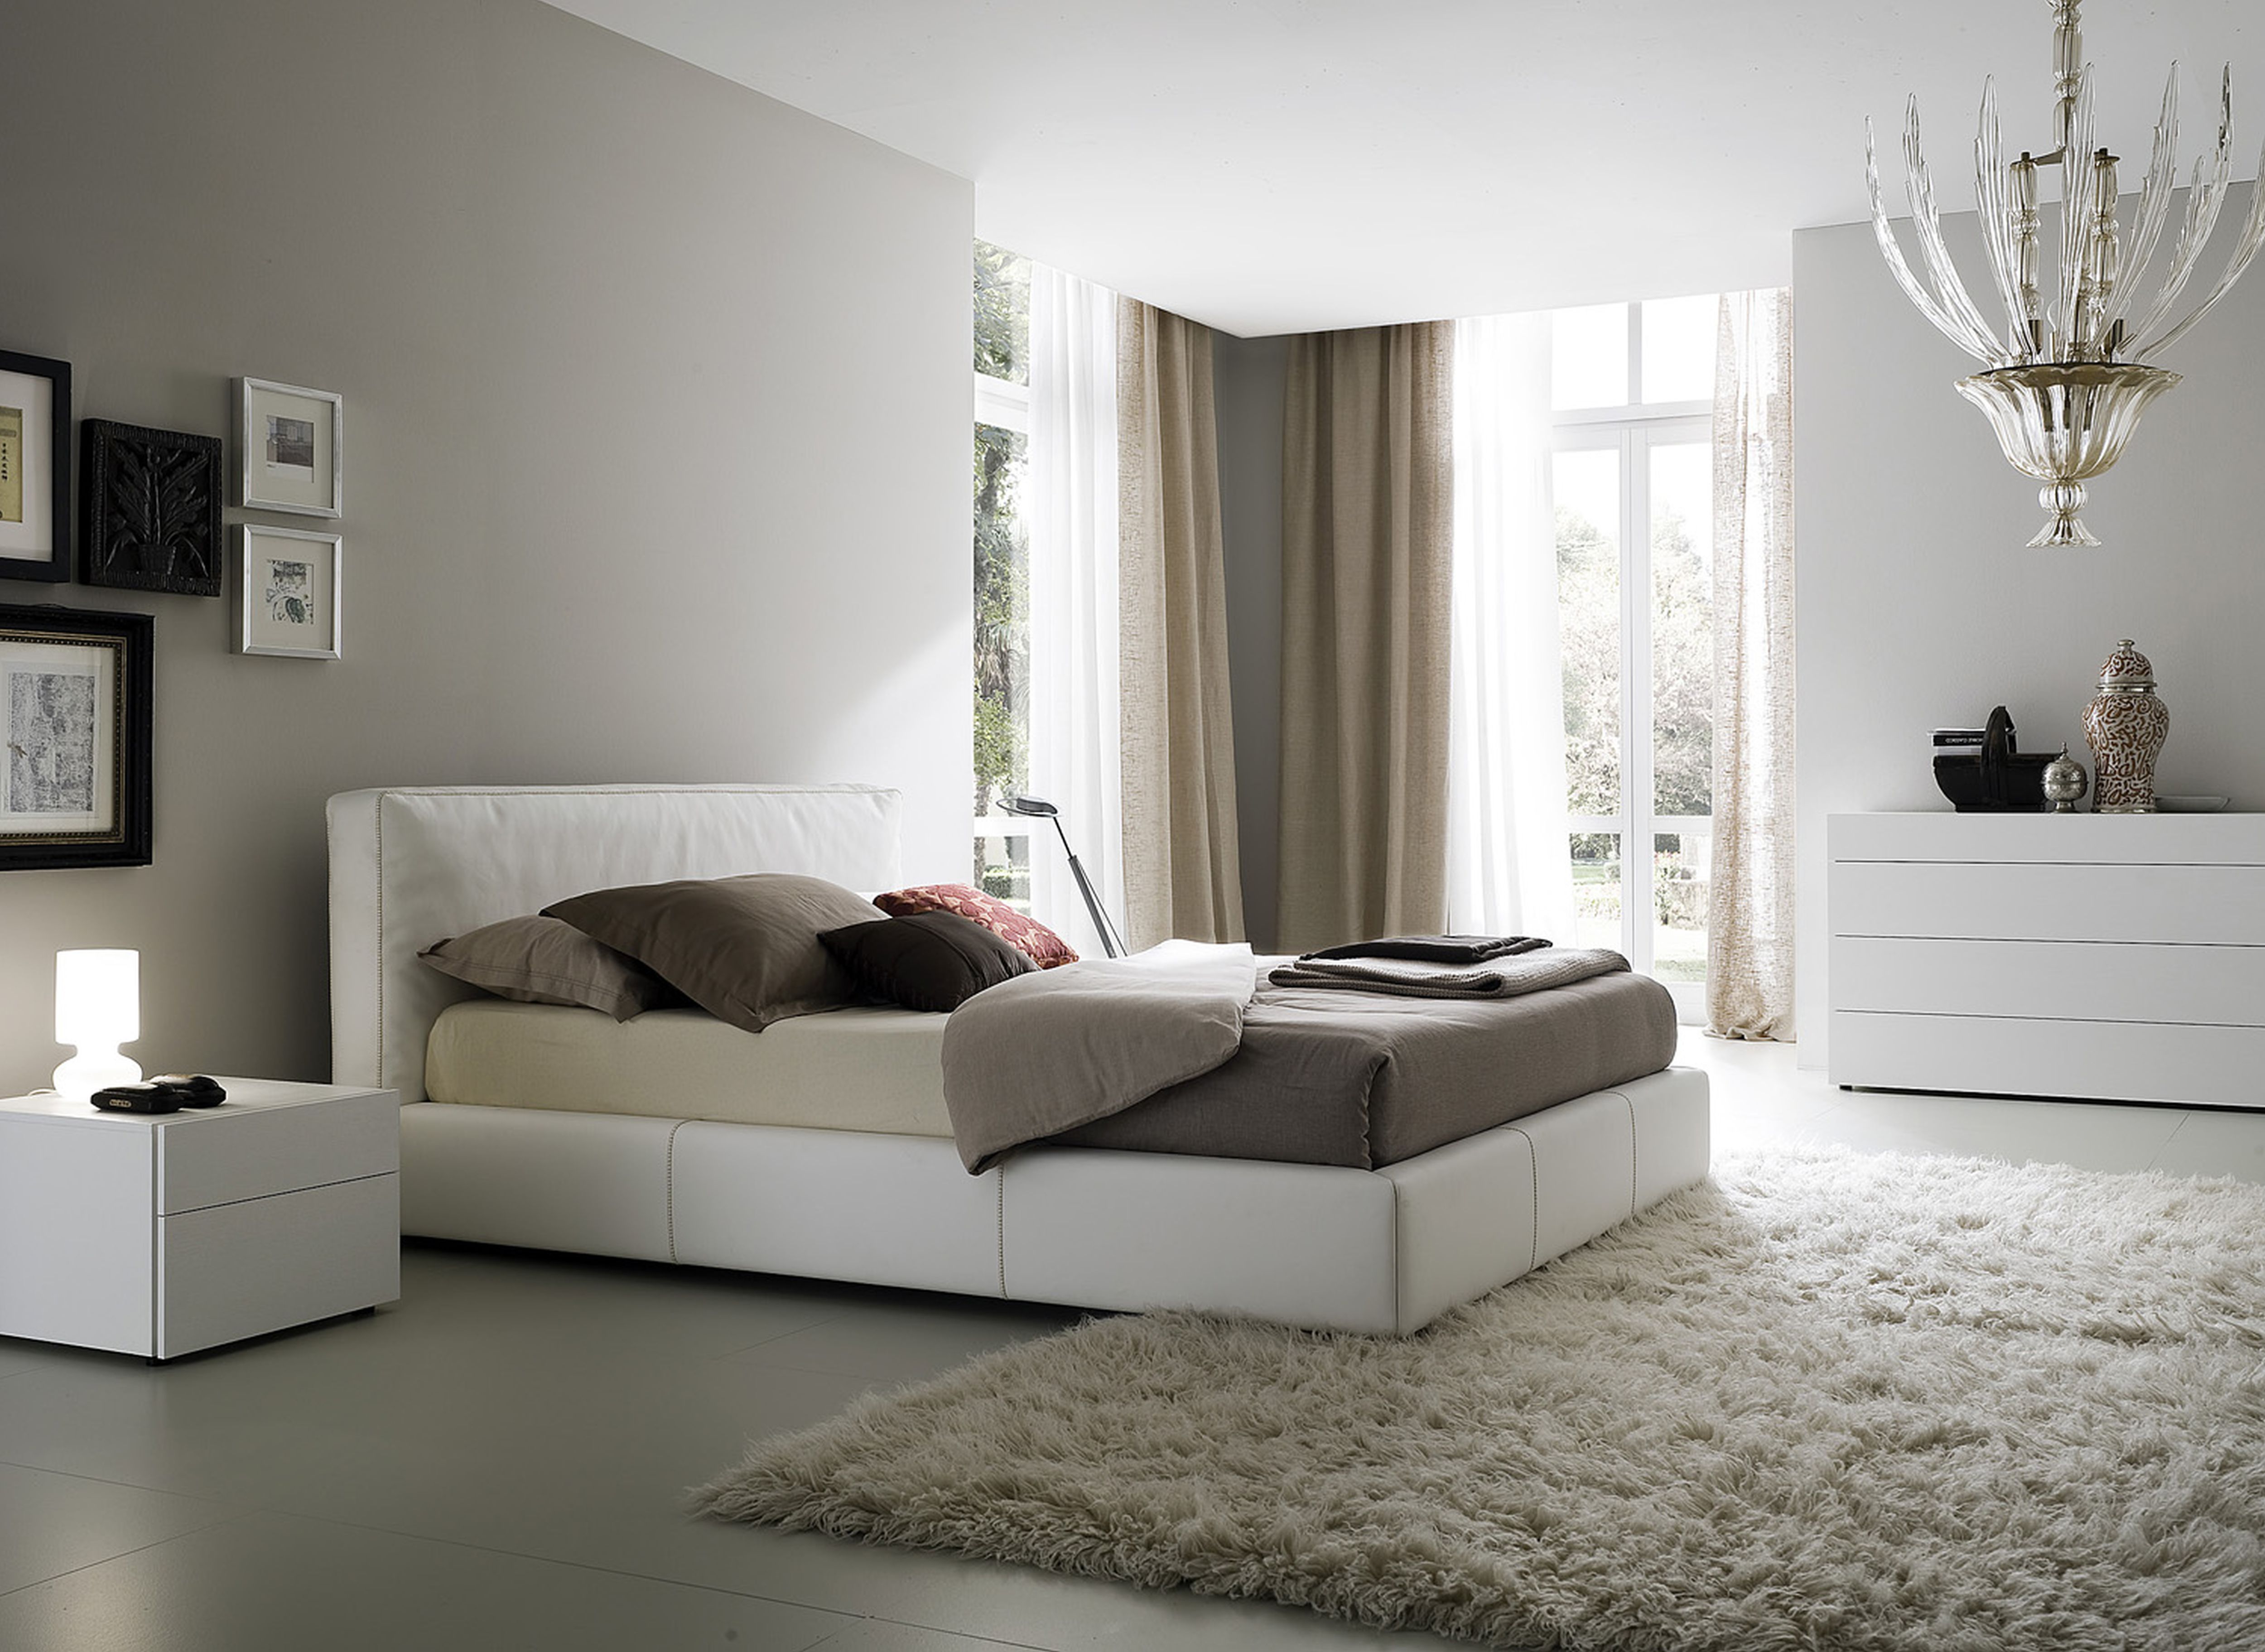 40 Modern Bedroom For Your Home - The WoW Style